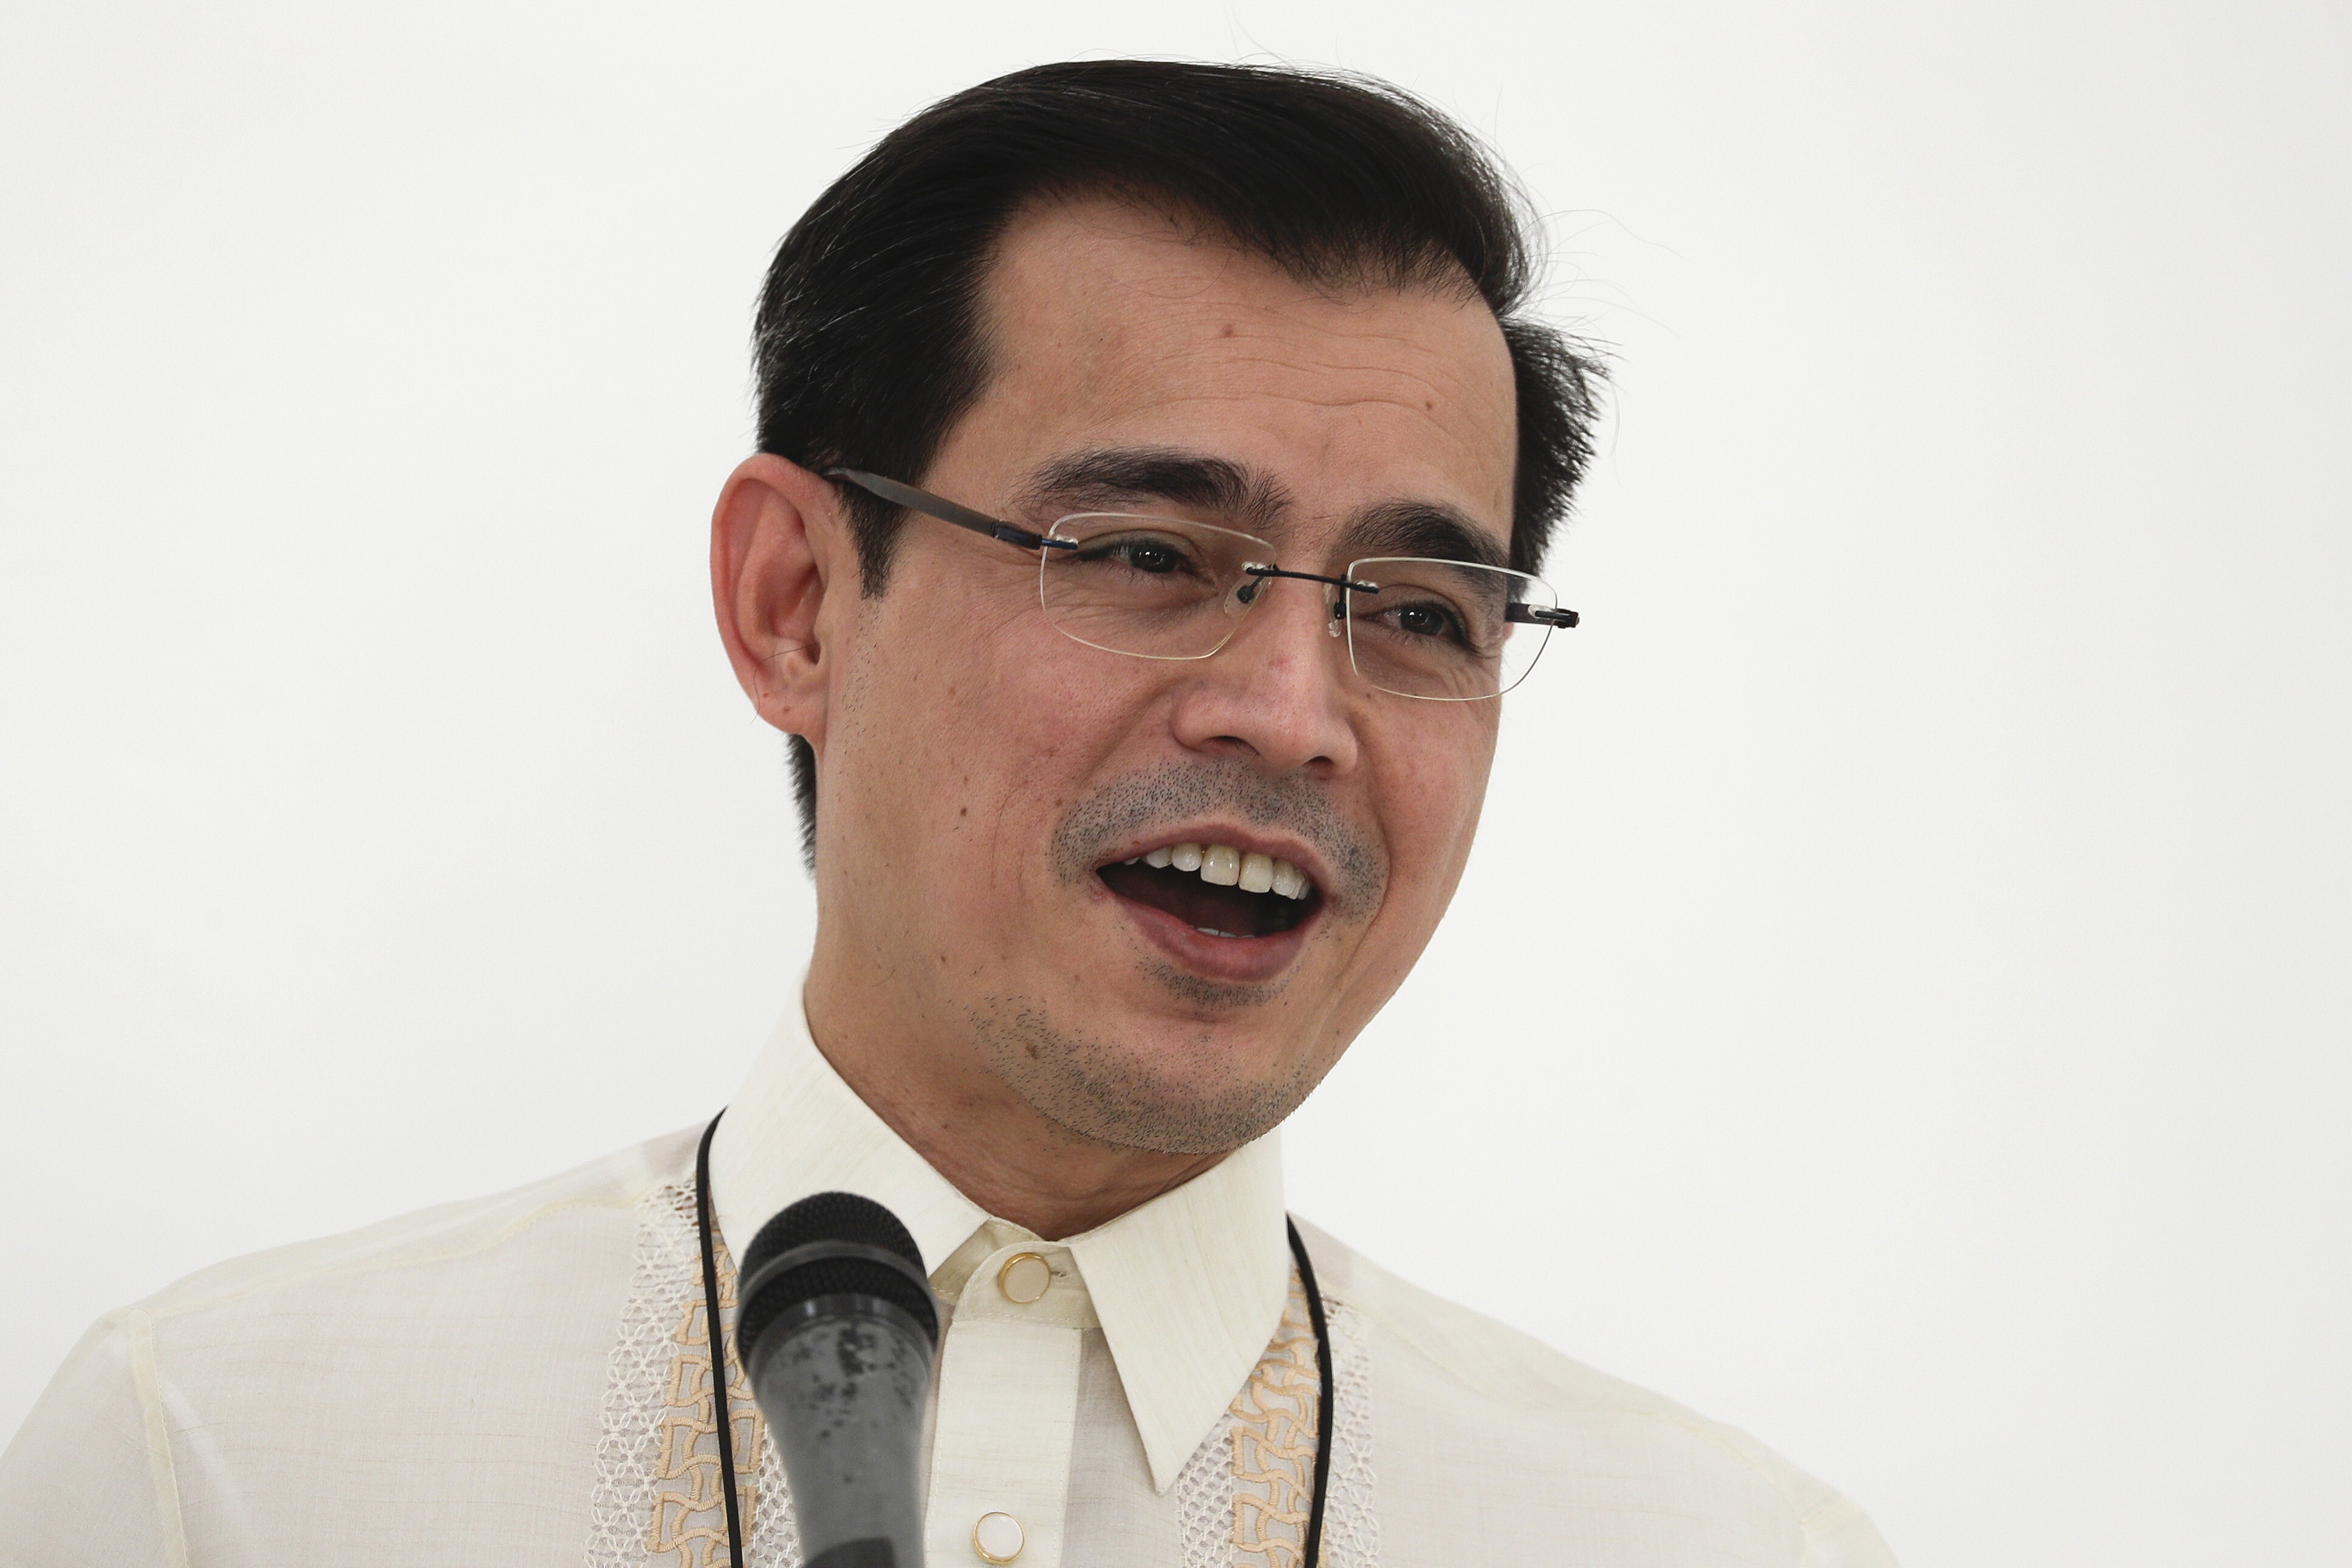 Manila Mayor Francisco ‘Isko Moreno’ Domagoso speaks at an inauguration ceremony in the Philippine capital earlier this year. Photo: AP